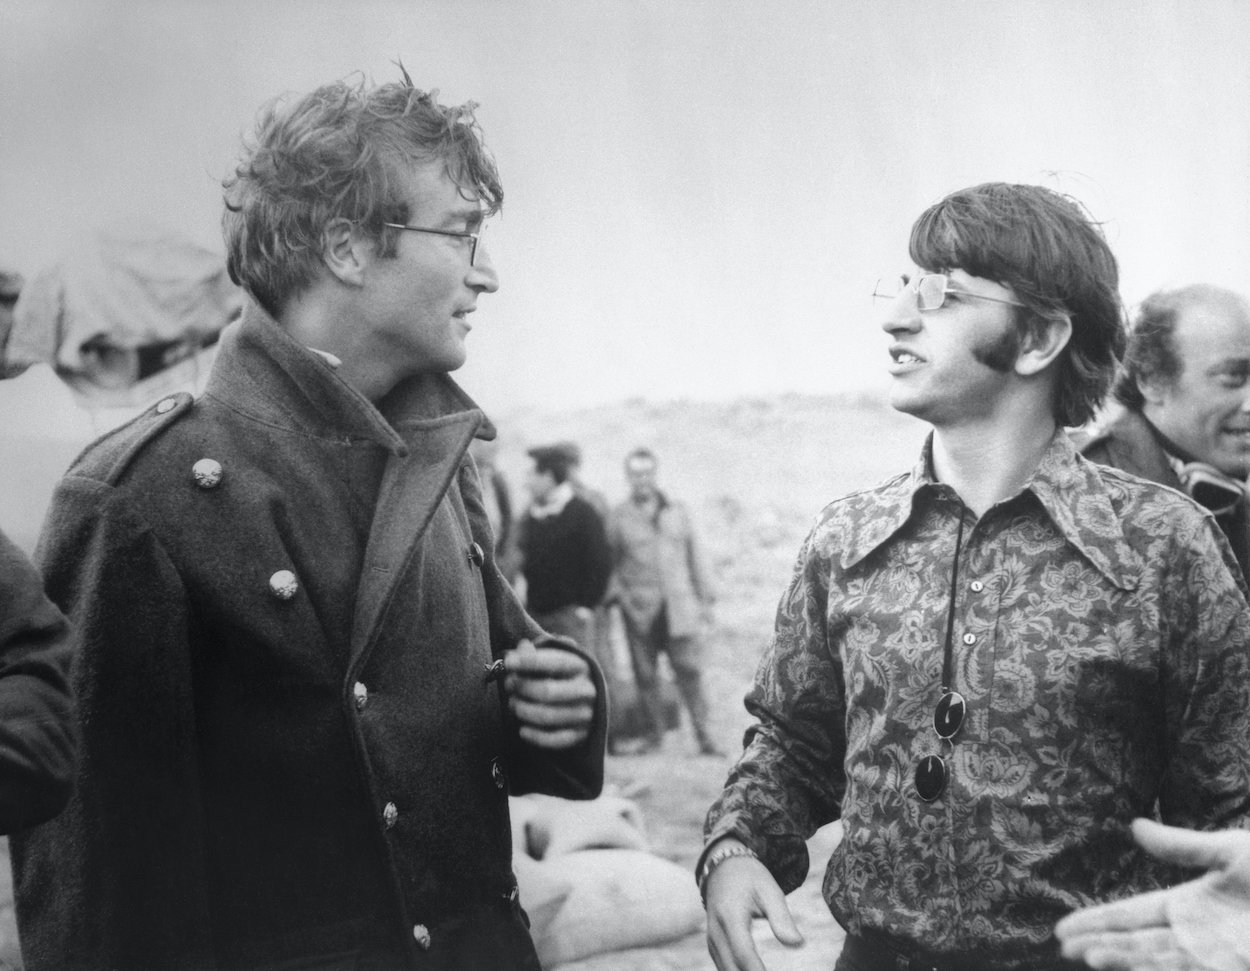 John Lennon (left) and Ringo Starr in 1966. Ringo was blown away by John's mentality during a 1980 visit, and it led to him giving his friend the ultimate compliment.